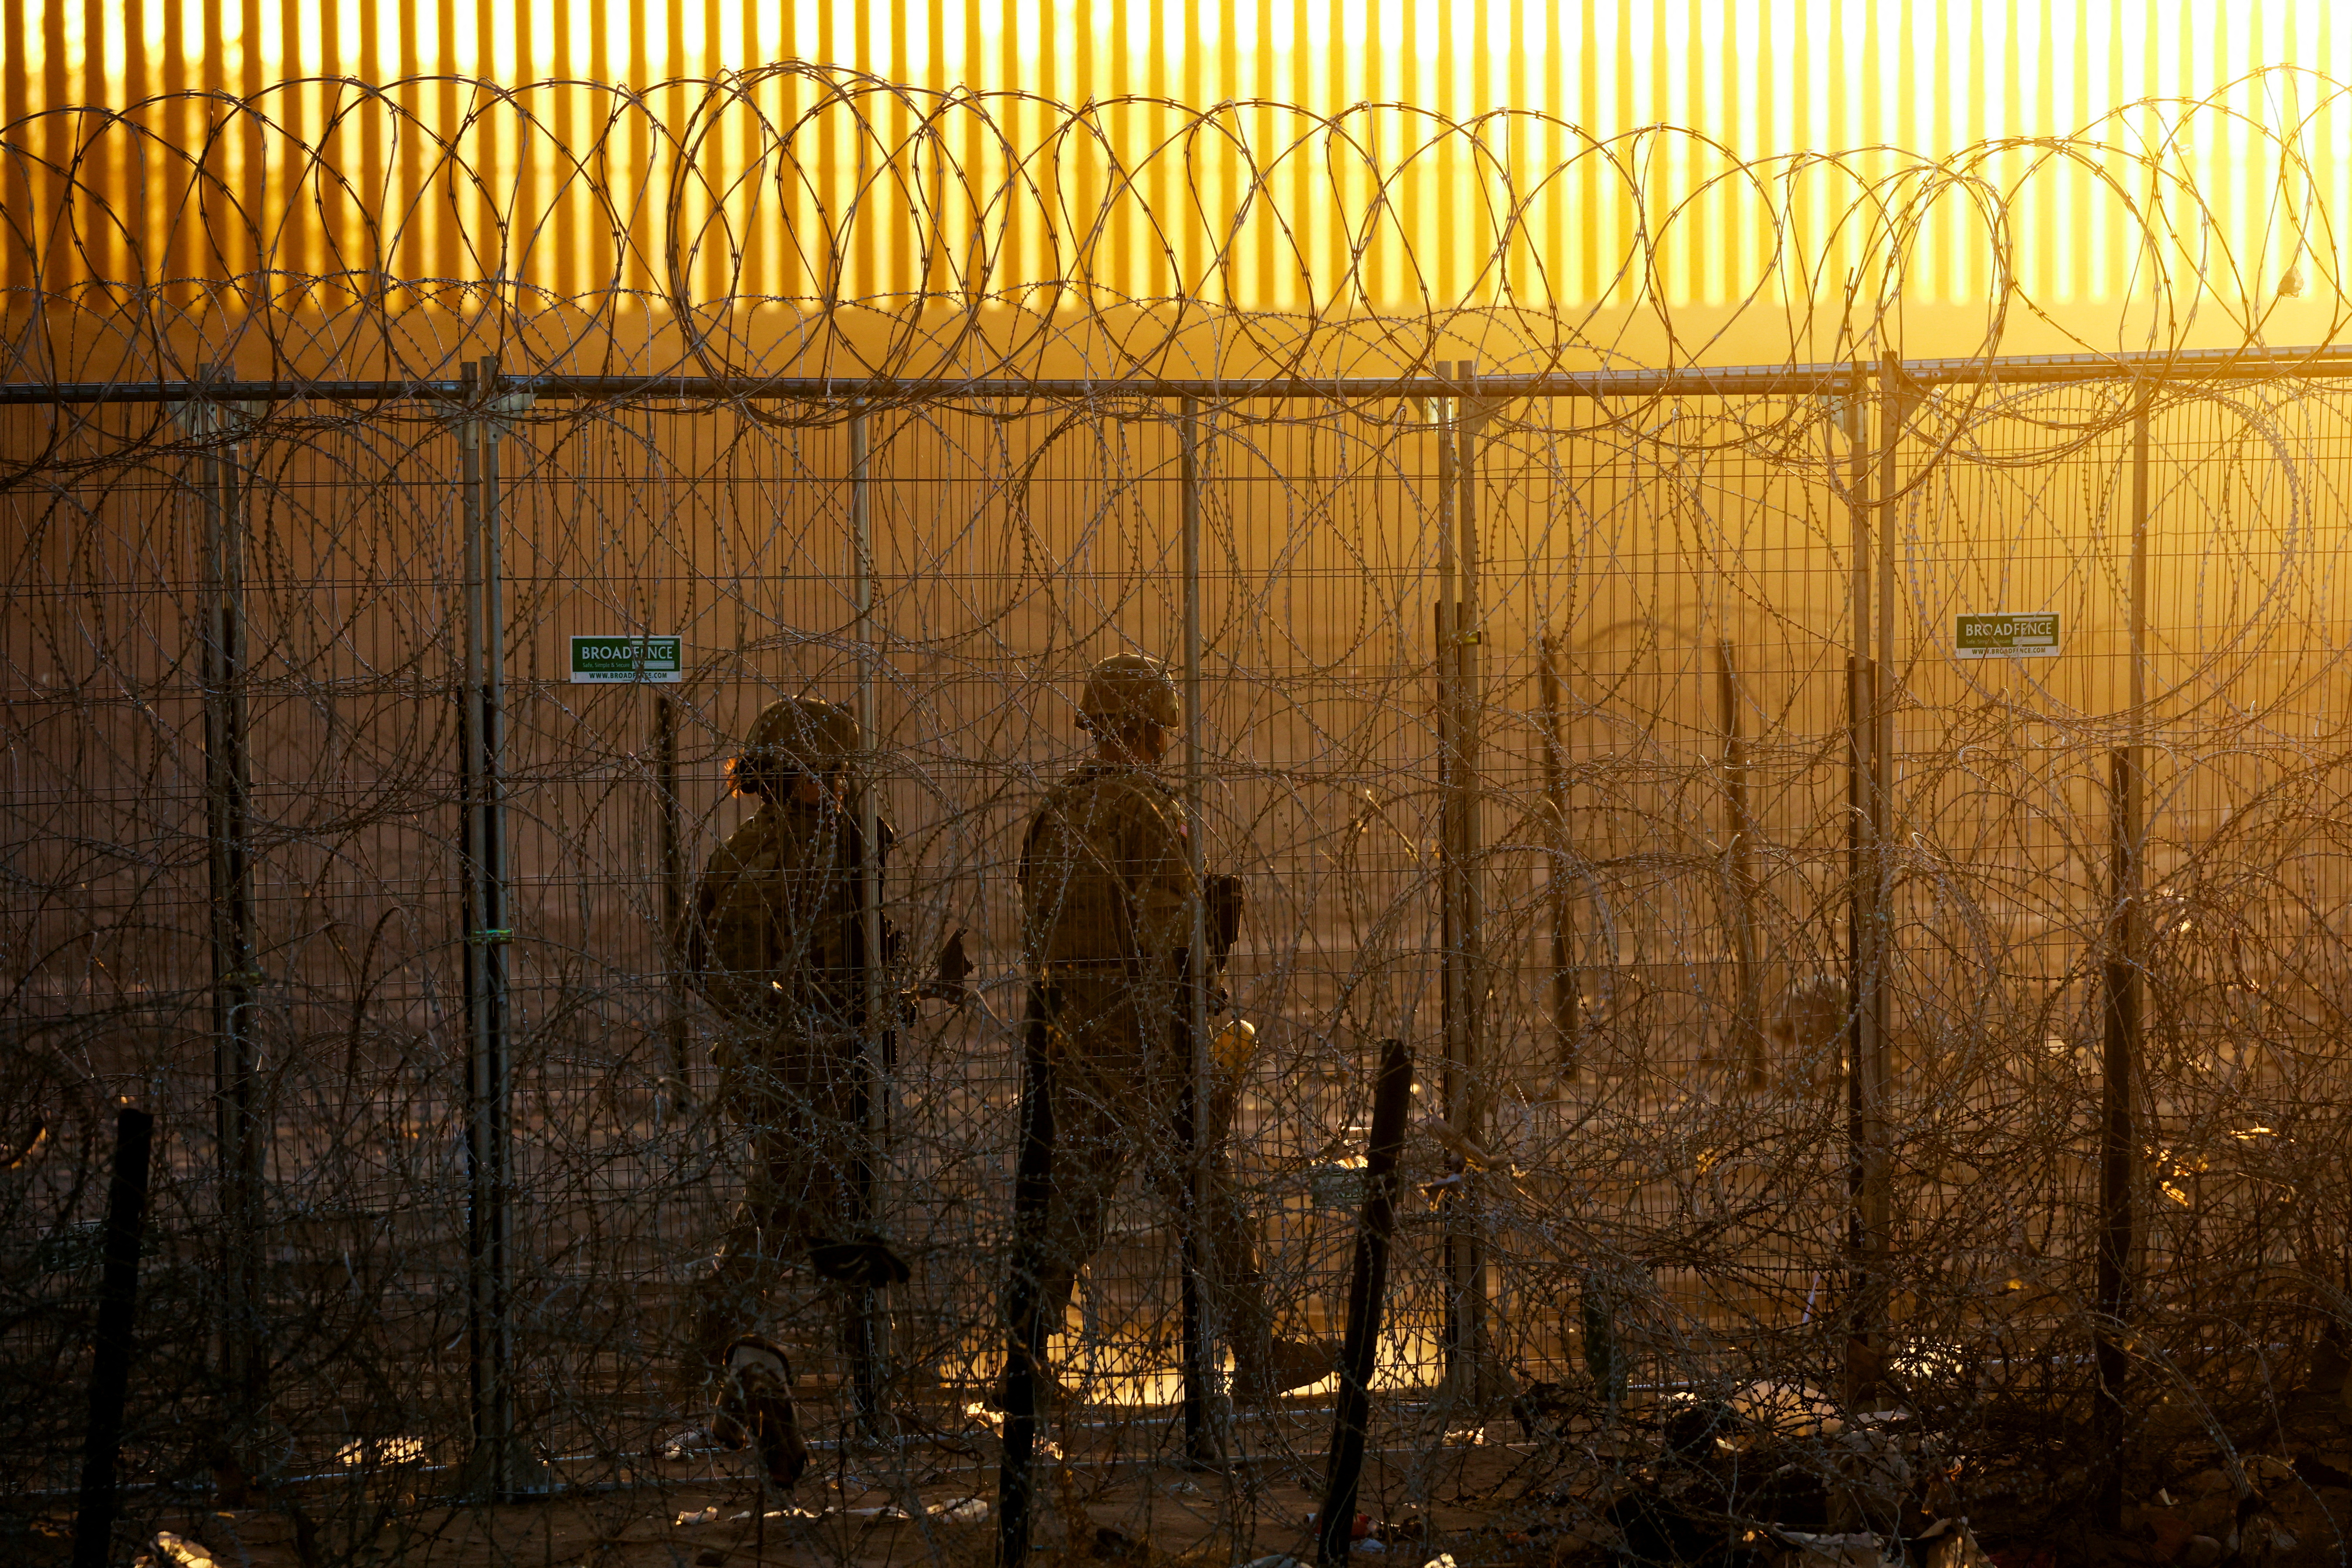 Members of the Texas National Guard stand guard near a razor wire fence to inhibit the crossing of migrants into the United States, seen from Ciudad Juarez